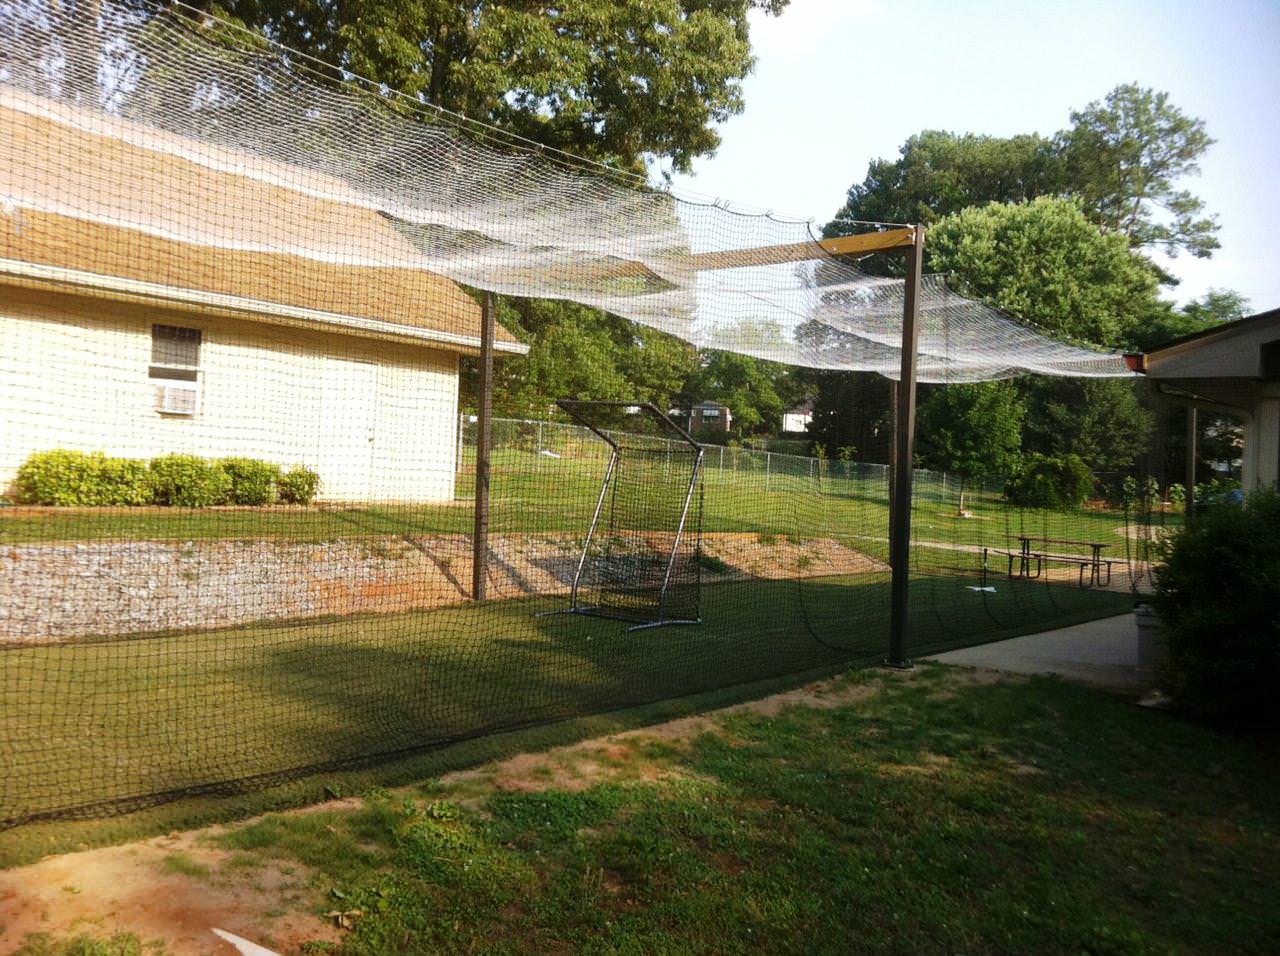 Building a Home Batting Cage